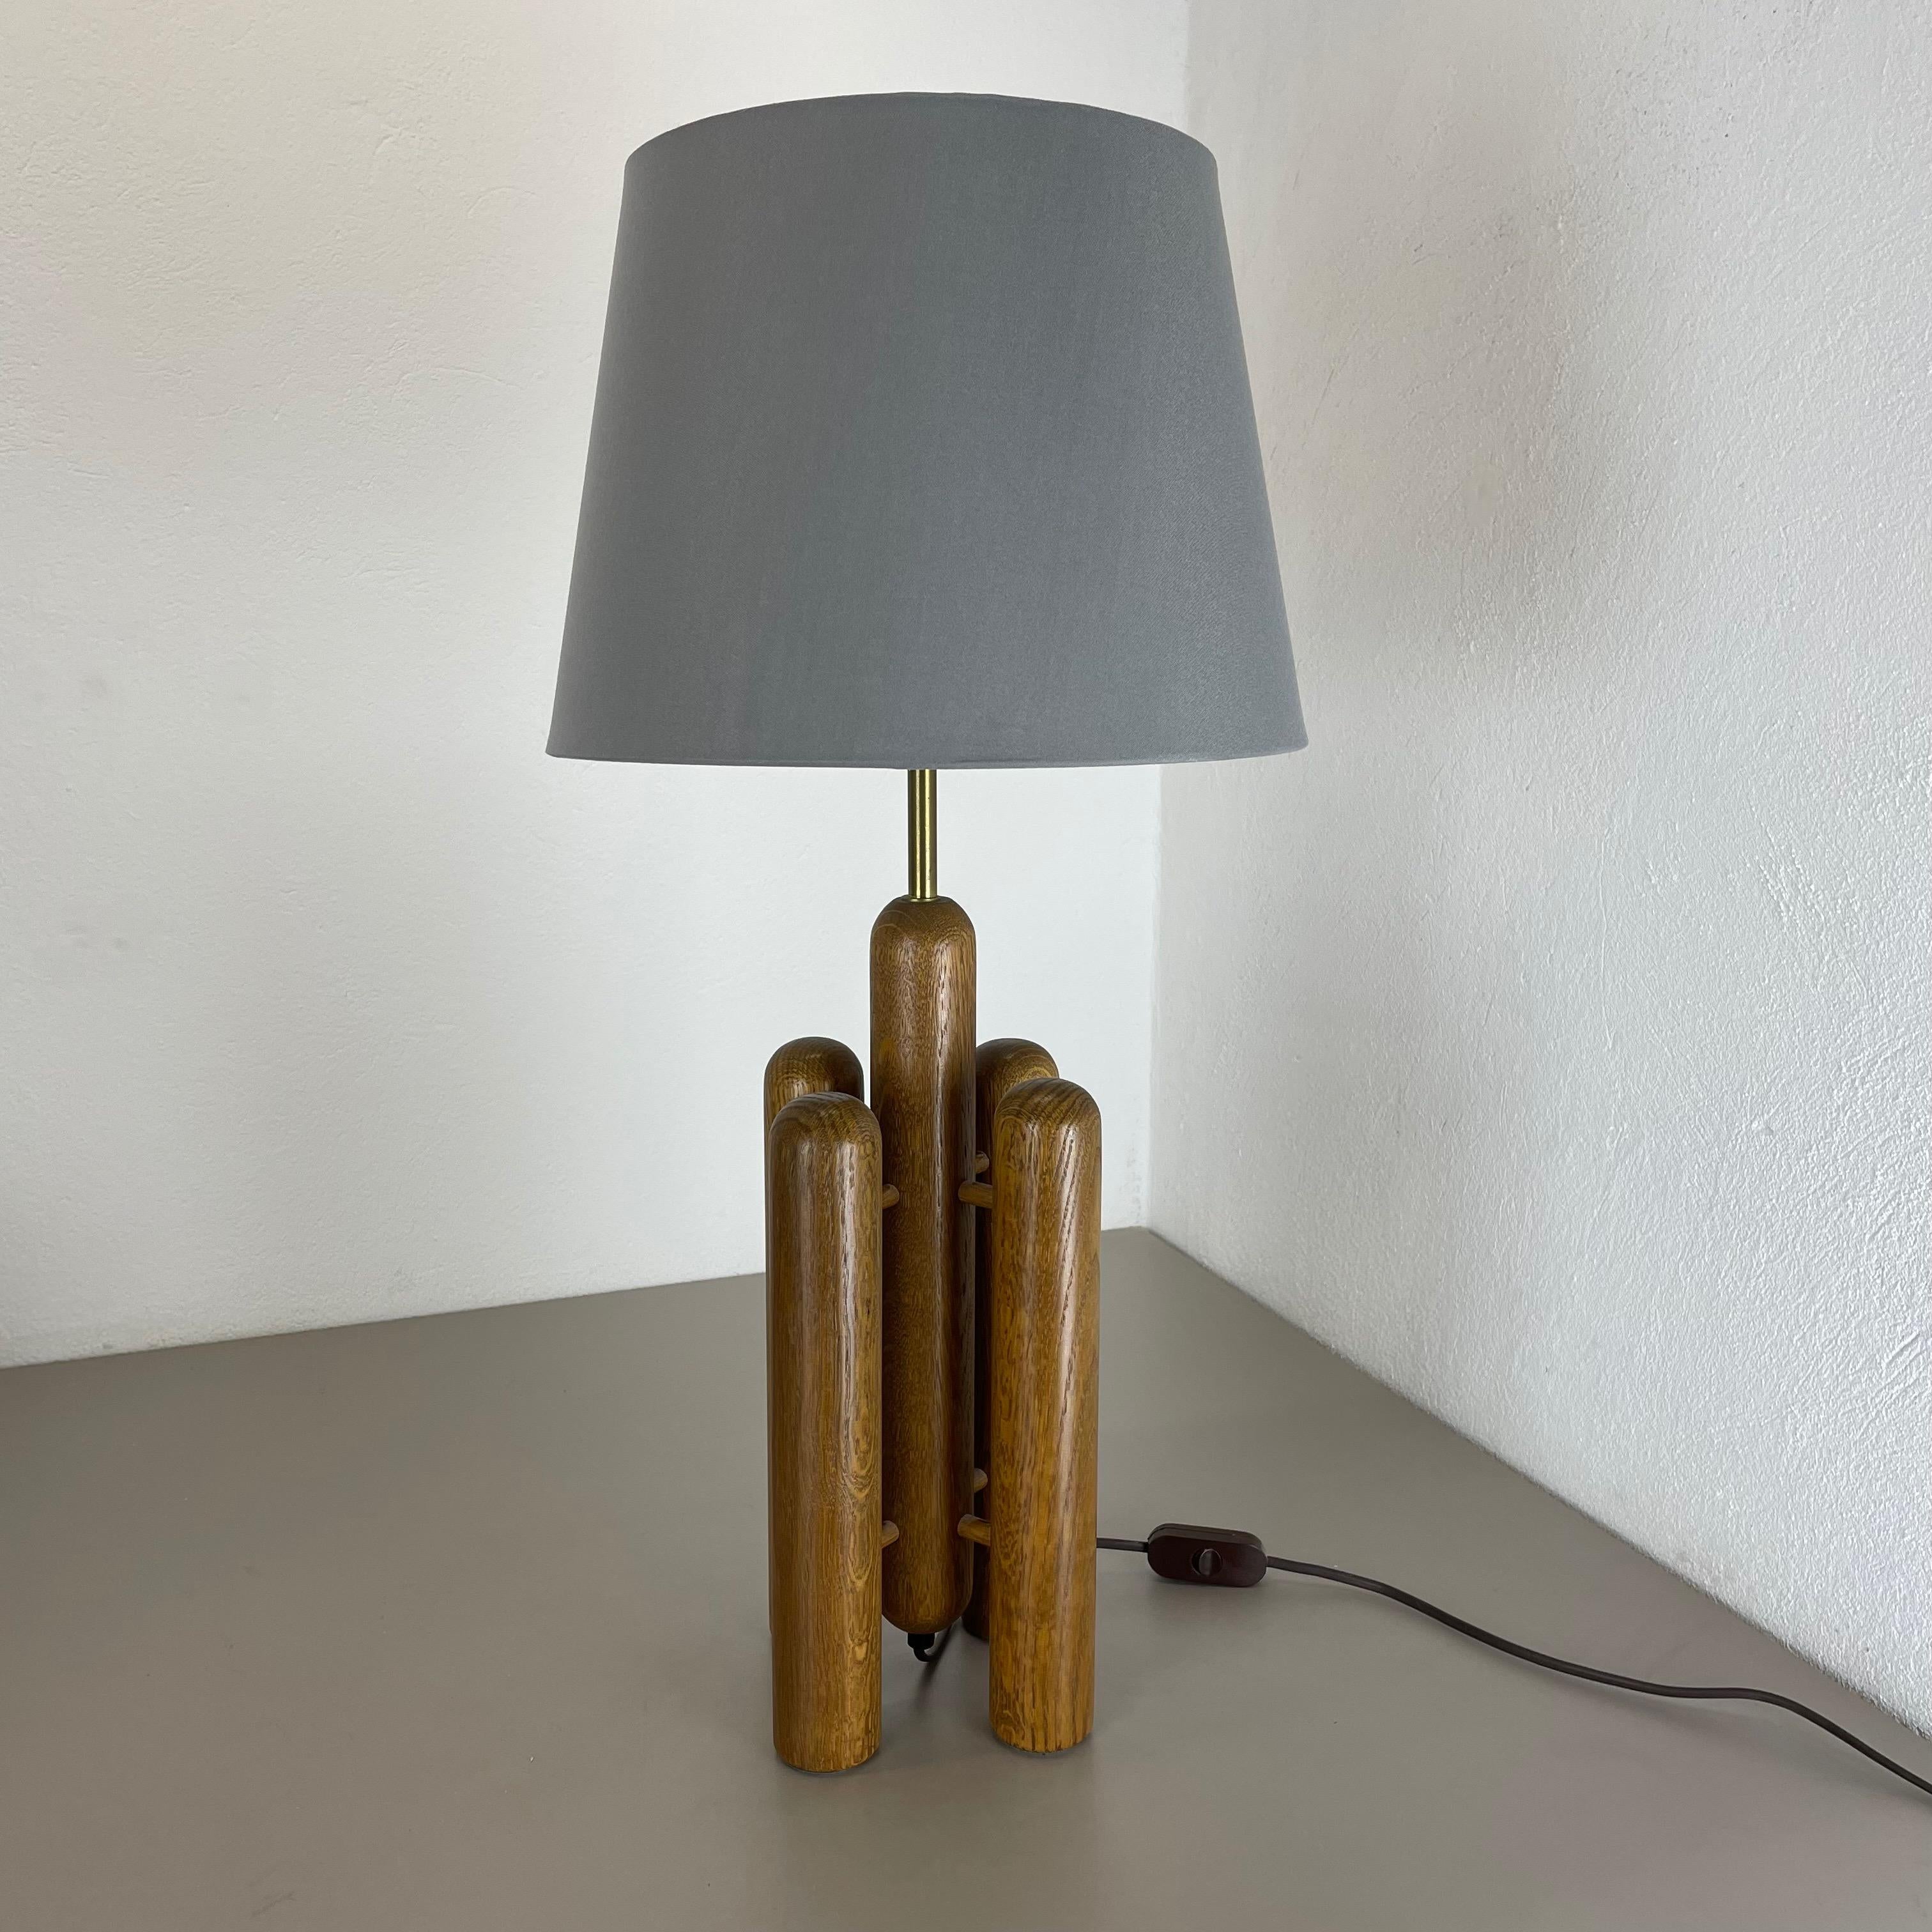 Article:

Wooden organic table light


Producer:

Temde lights, Germany



Origin:

Germany



Age:

1970s




Original vintage 1970s wooden table light base made in Germany. High quality German production with a nice